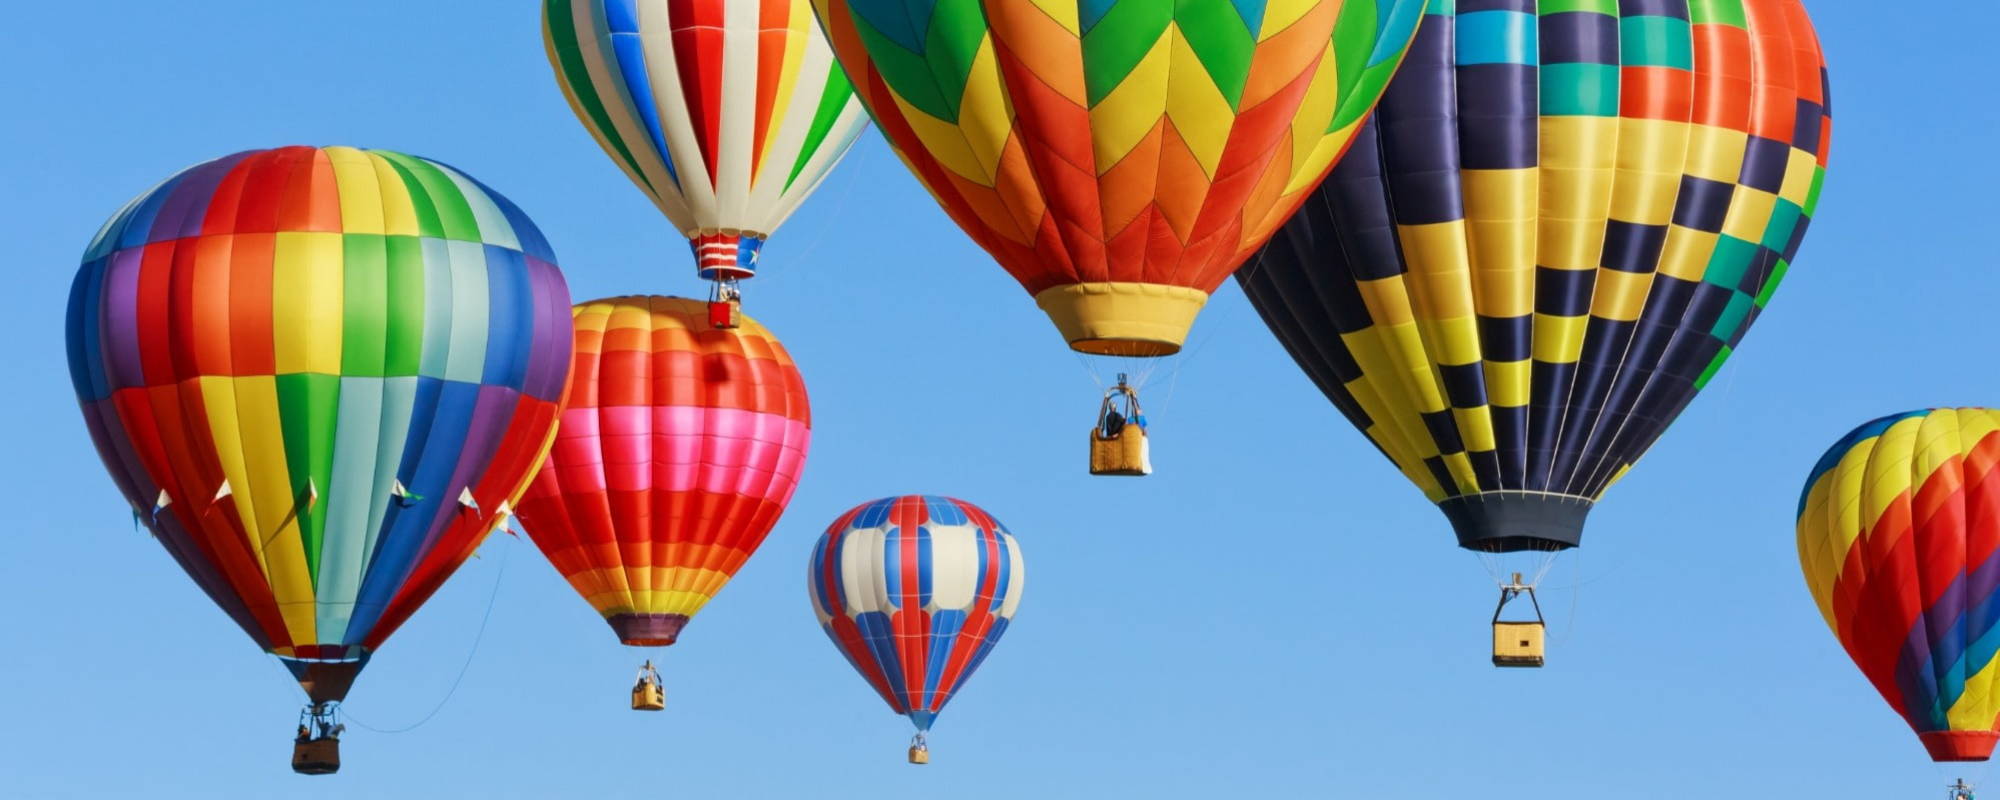 Brightly coloured hot air balloons against the sky